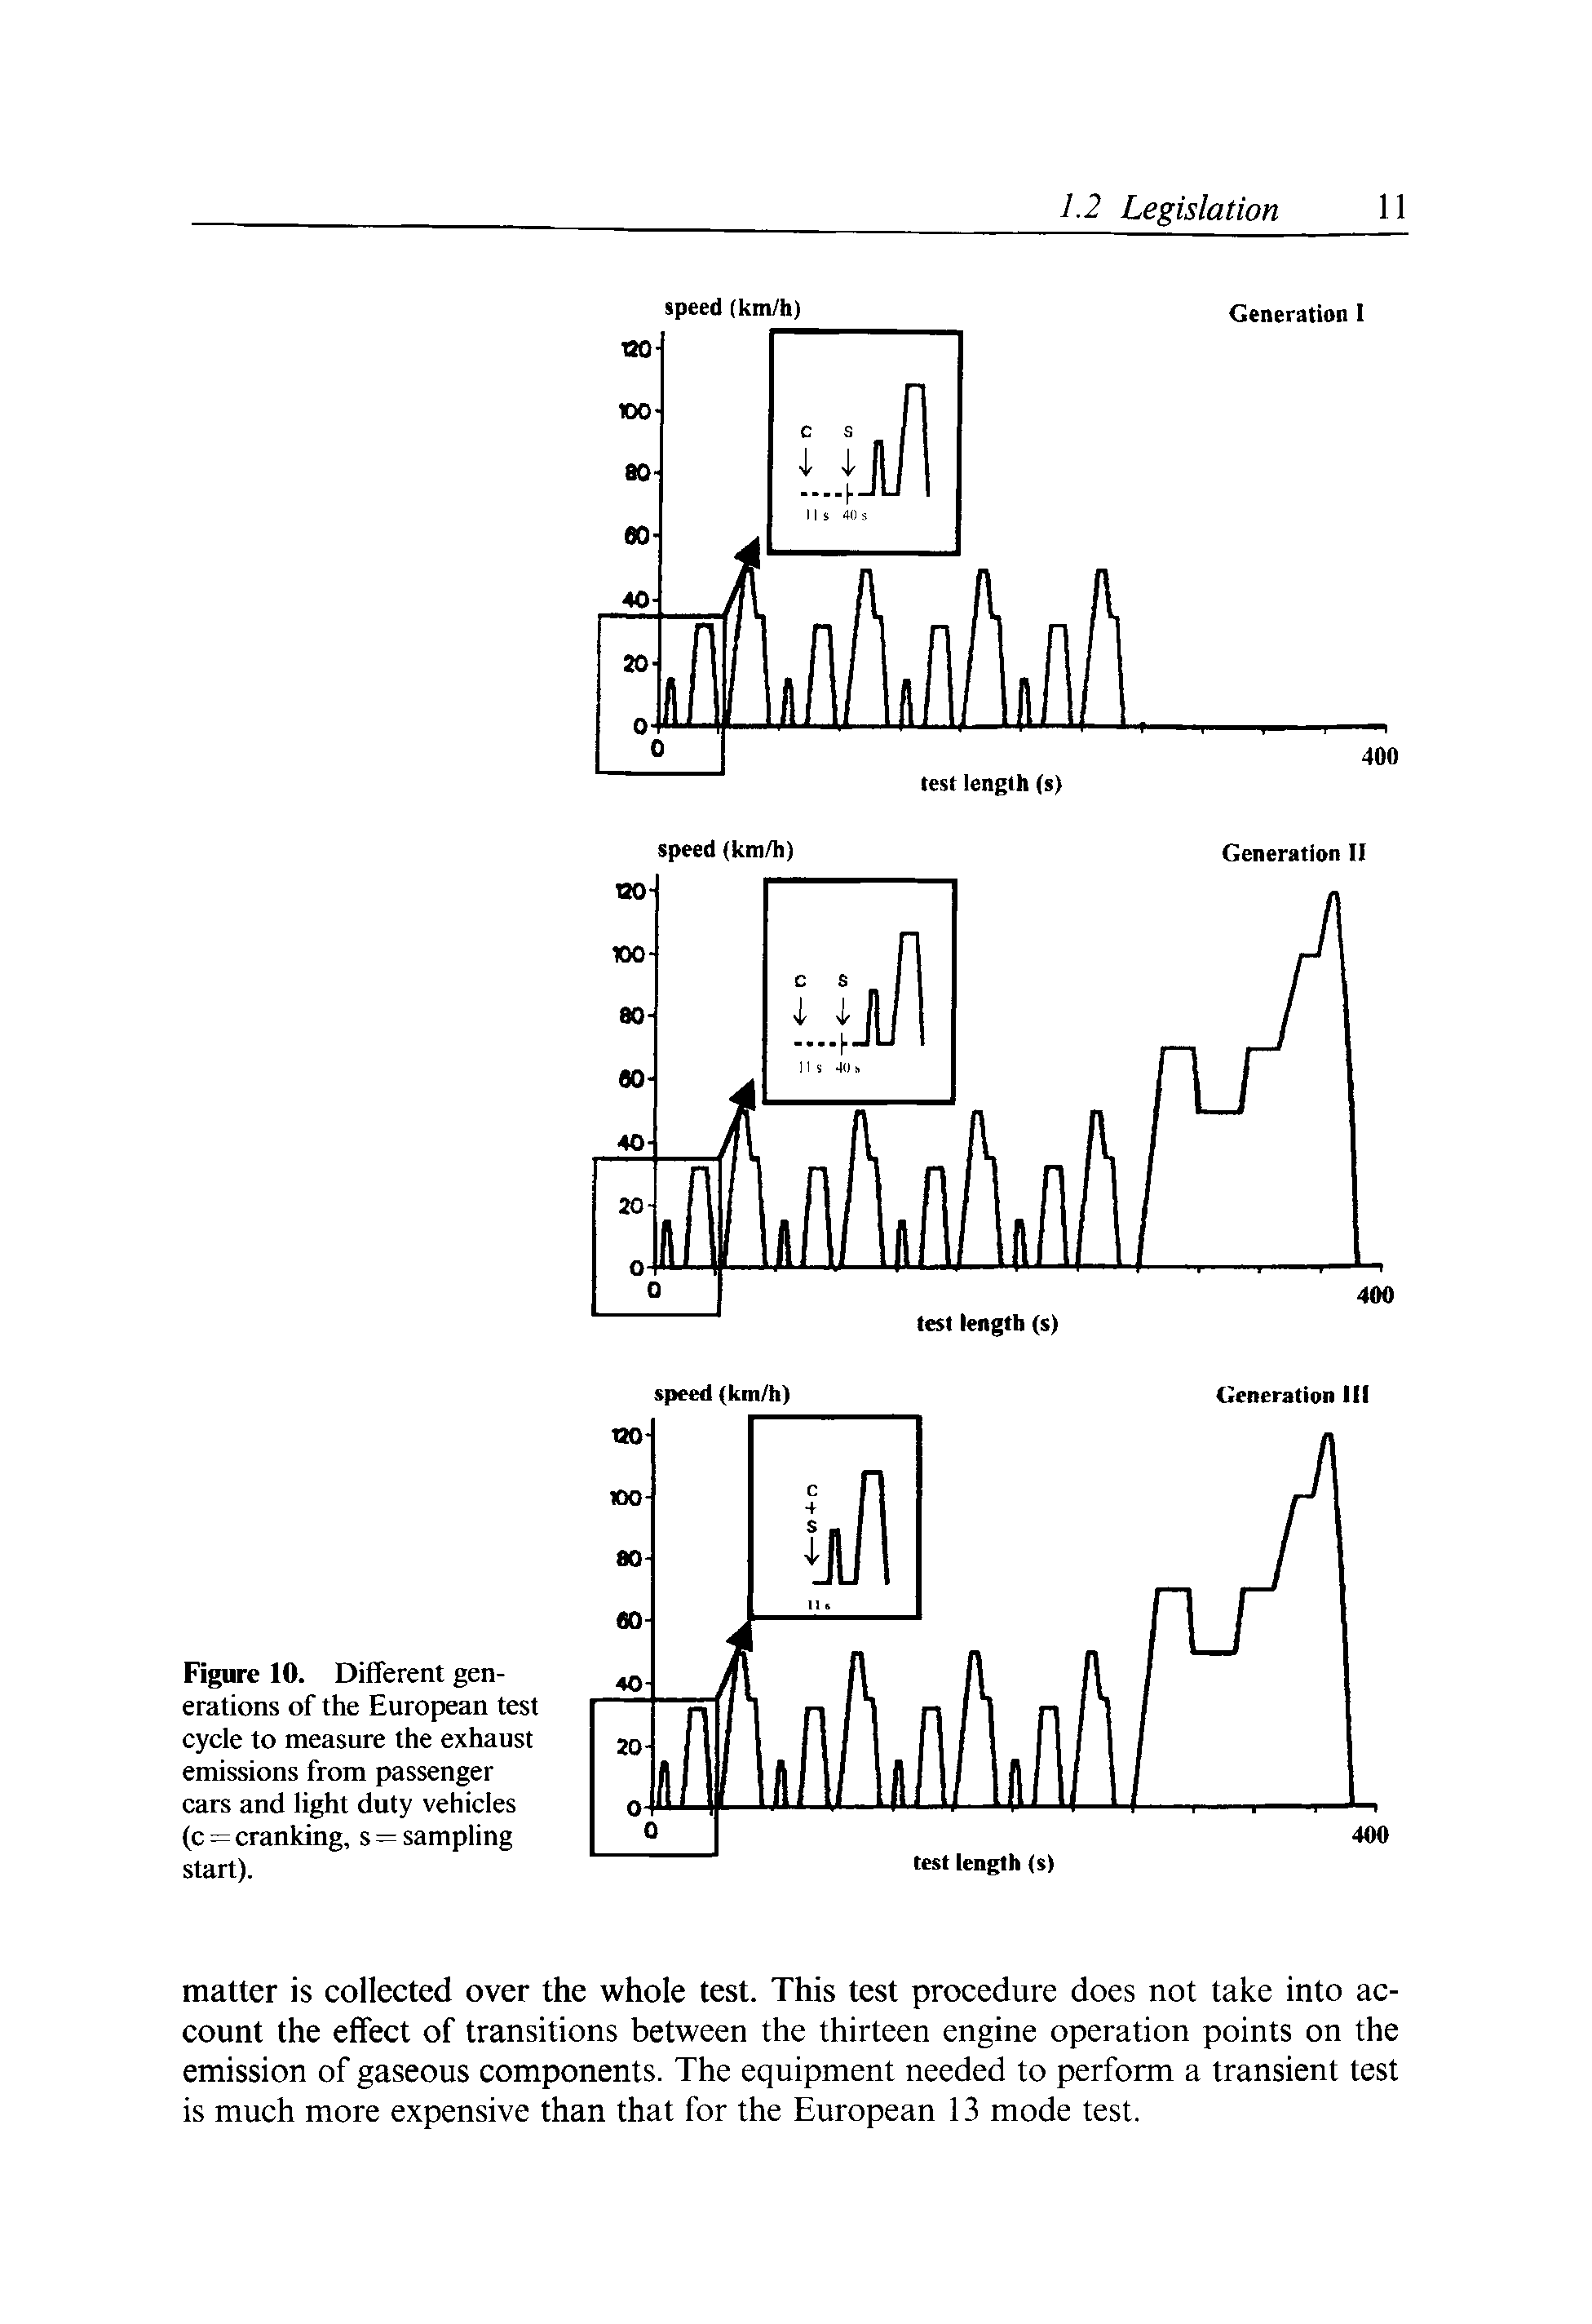 Figure 10. Different generations of the European test cycle to measure the exhaust emissions from passenger cars and light duty vehicles (c=cranking, s = sampling start).